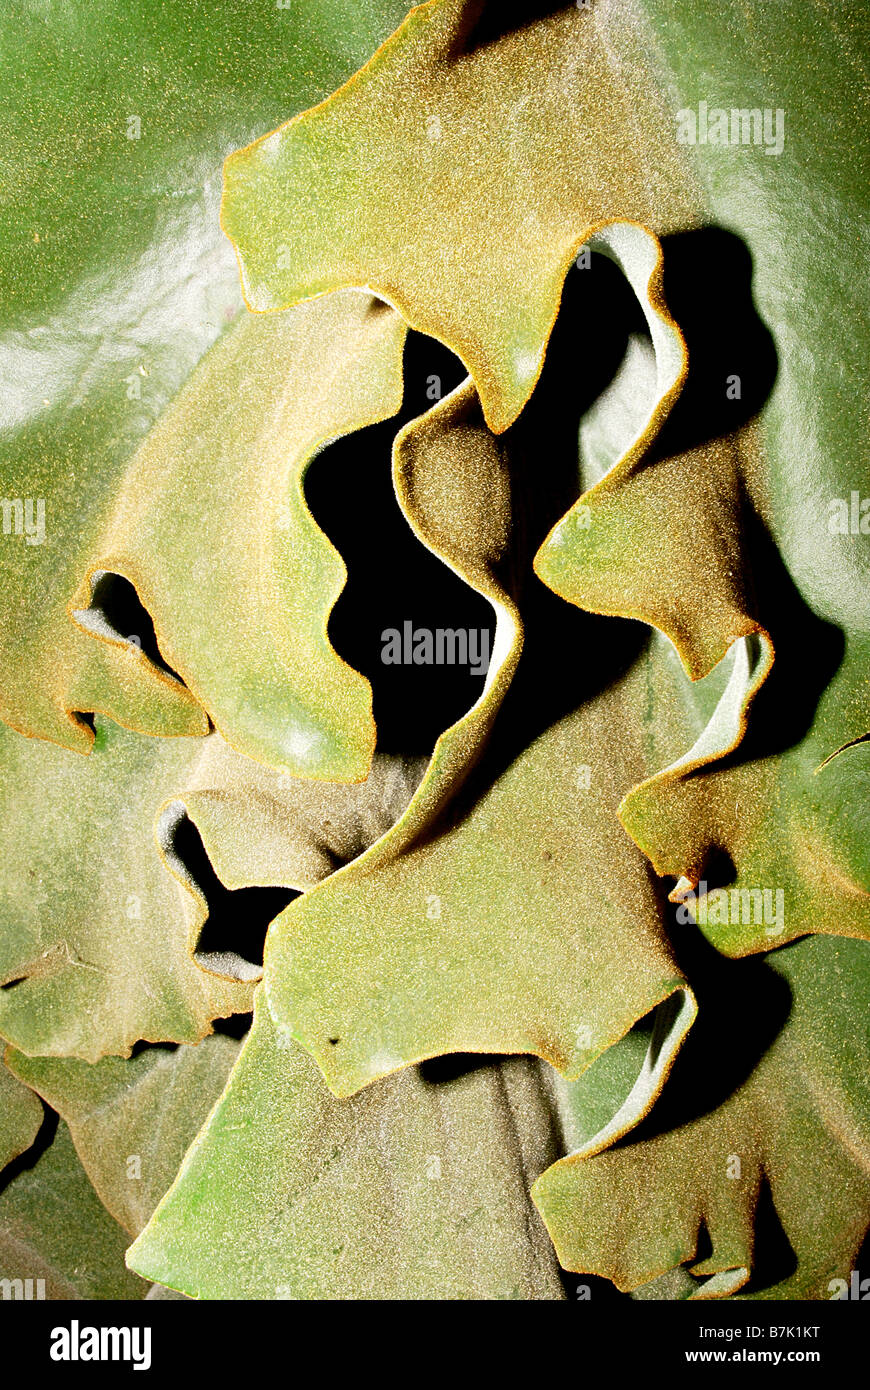 Abstract Plant flower texture, cactus Stock Photo